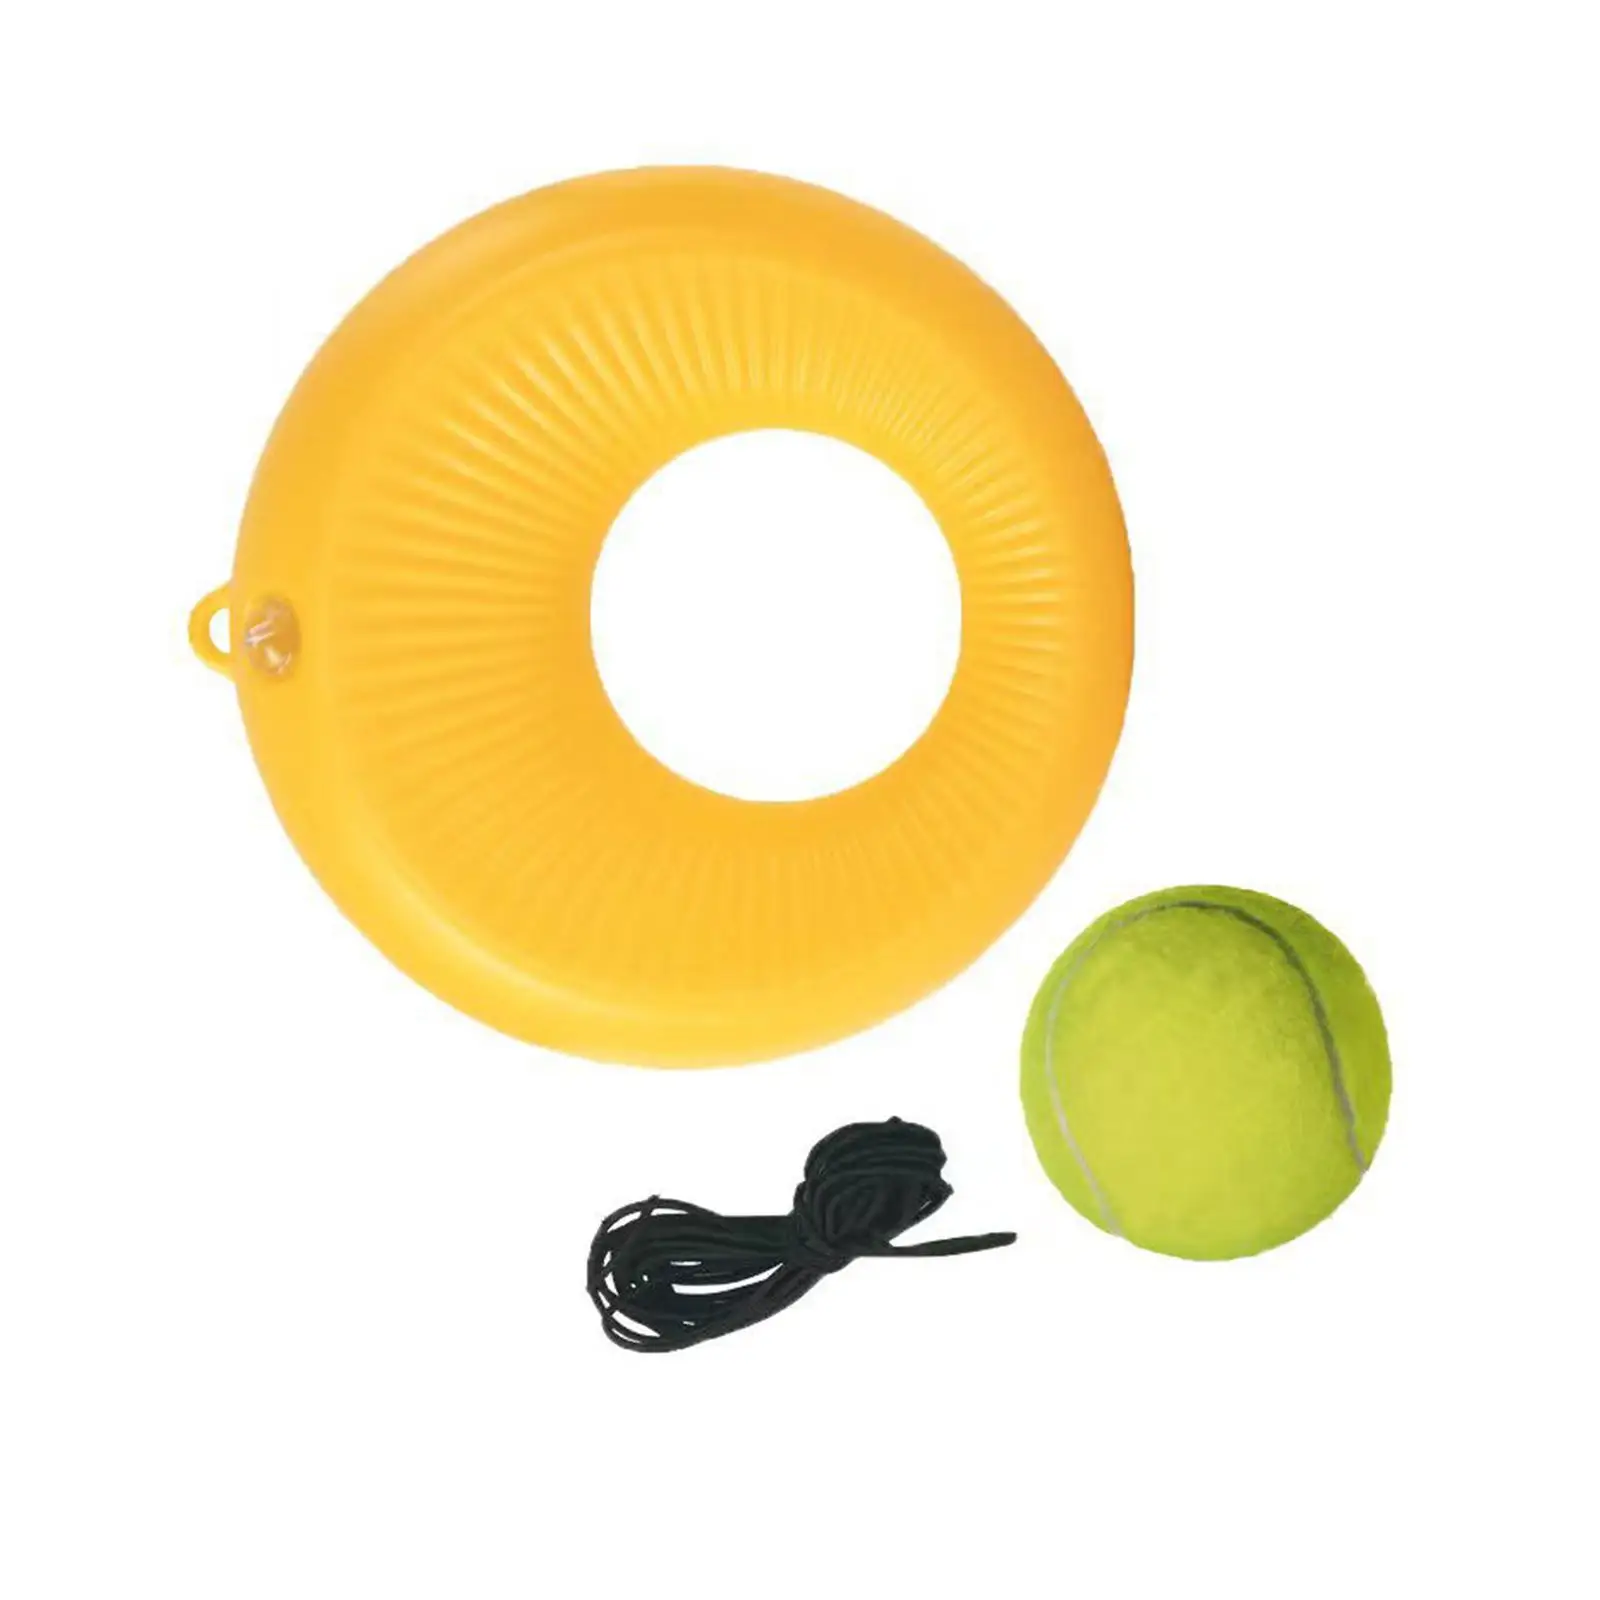 Tennis Rebounder with String Parent Child Interactive Toy Exerciser System